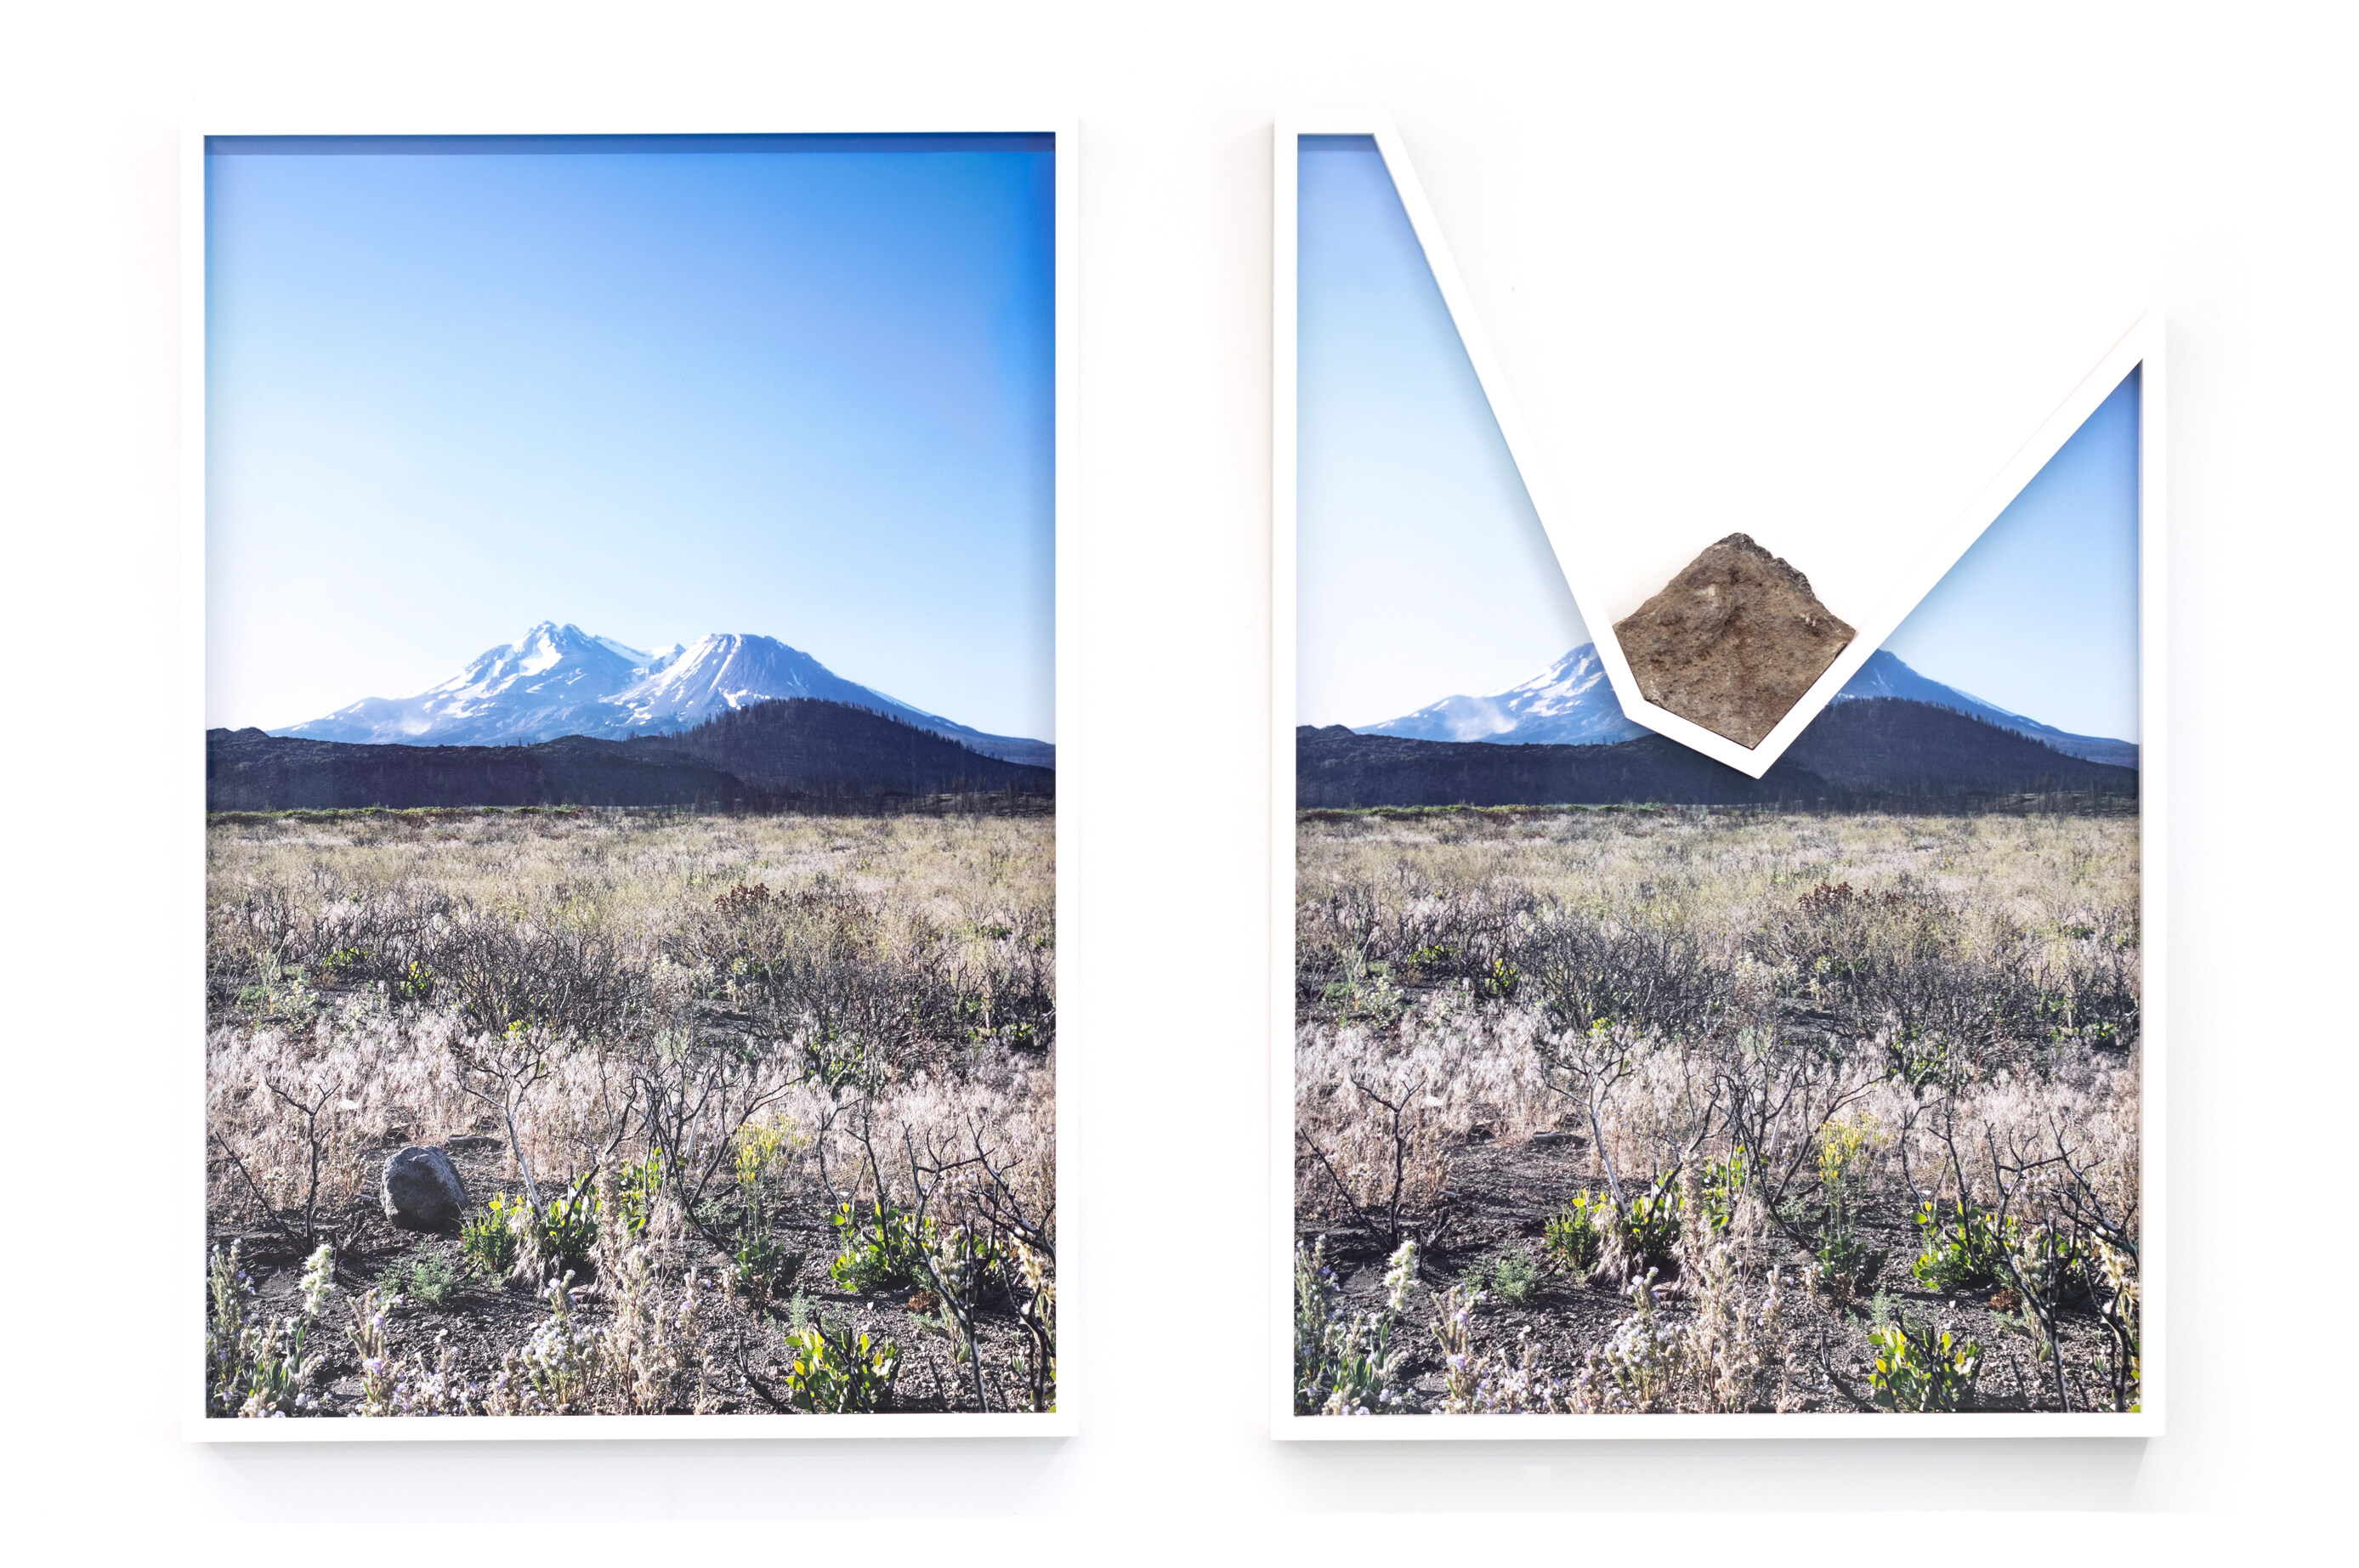 Color image of two color photographs of a mountain range set amongst a verdant field